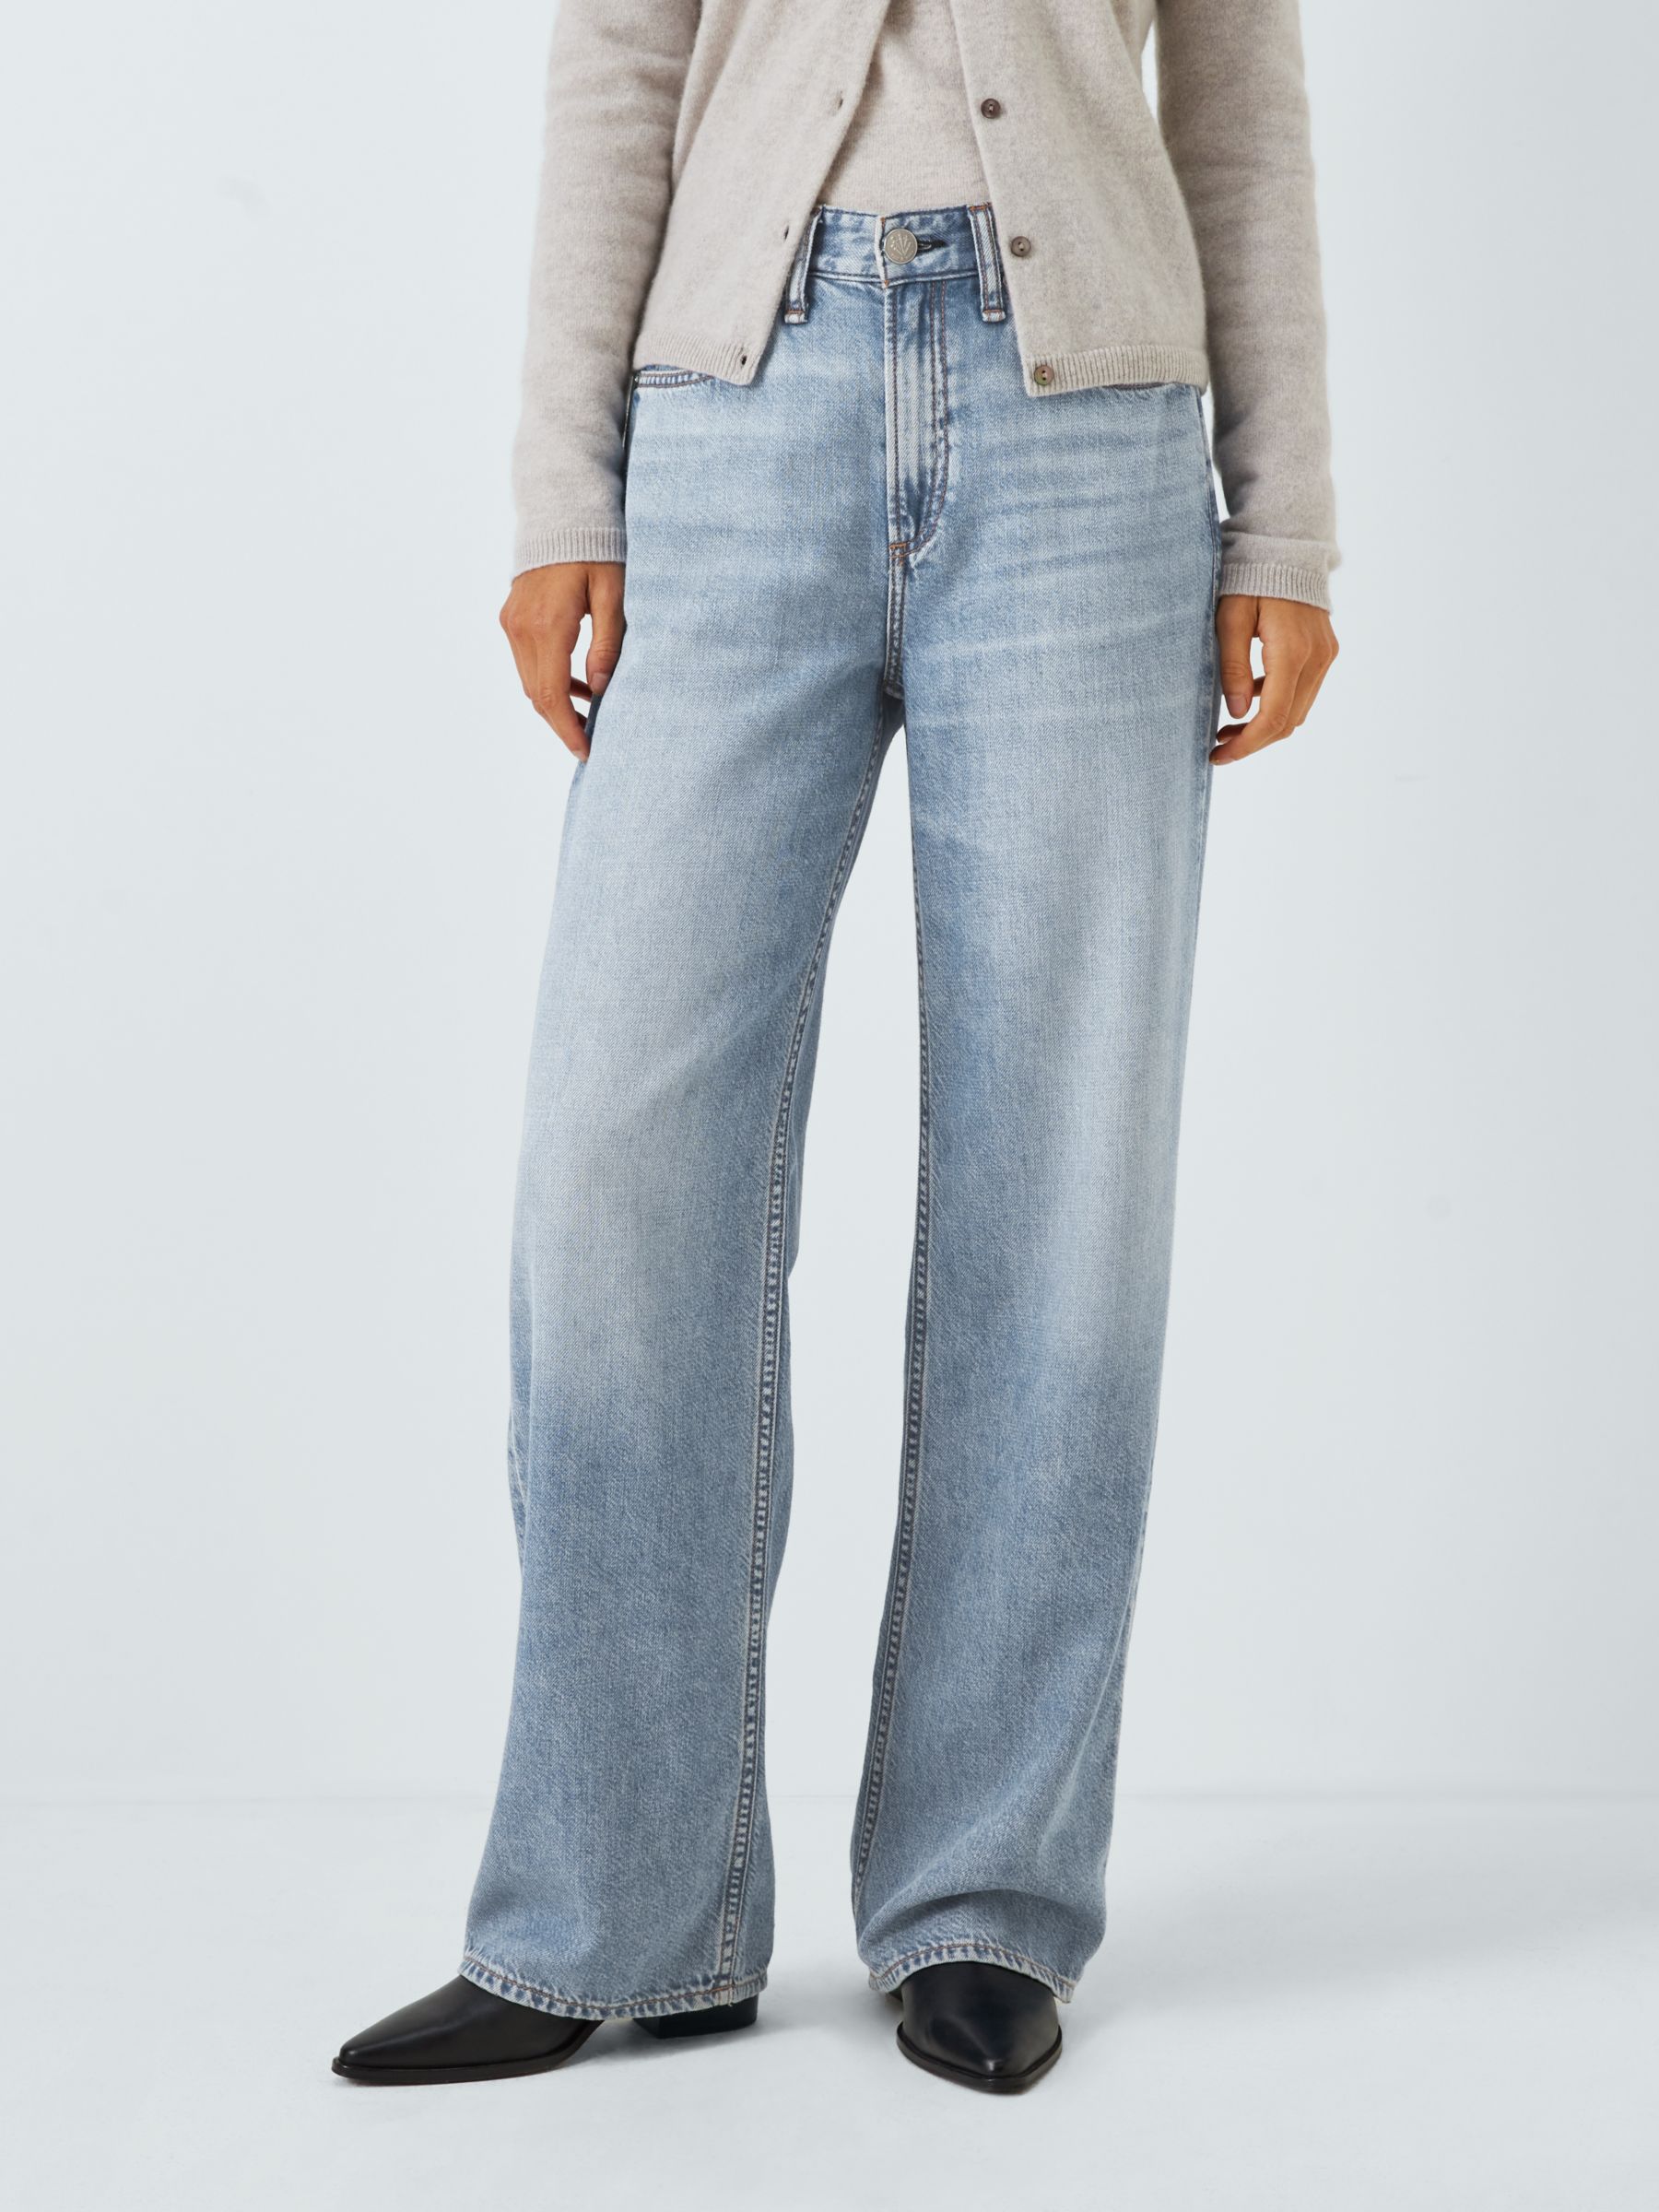 NYDJ's Blake Slim Flared Jeans give me the perfect fit